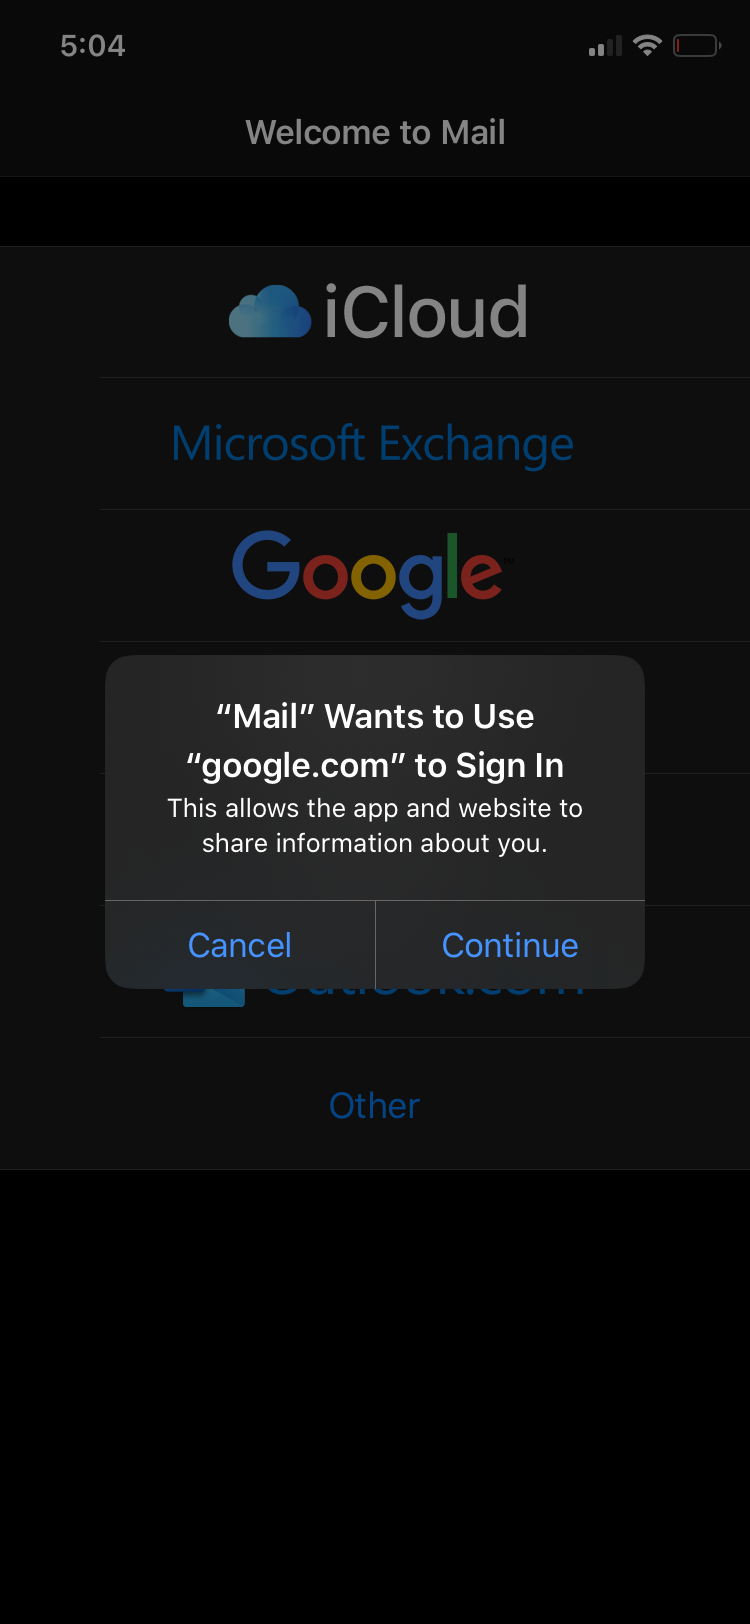 Continue to Gmail login on Mail app.